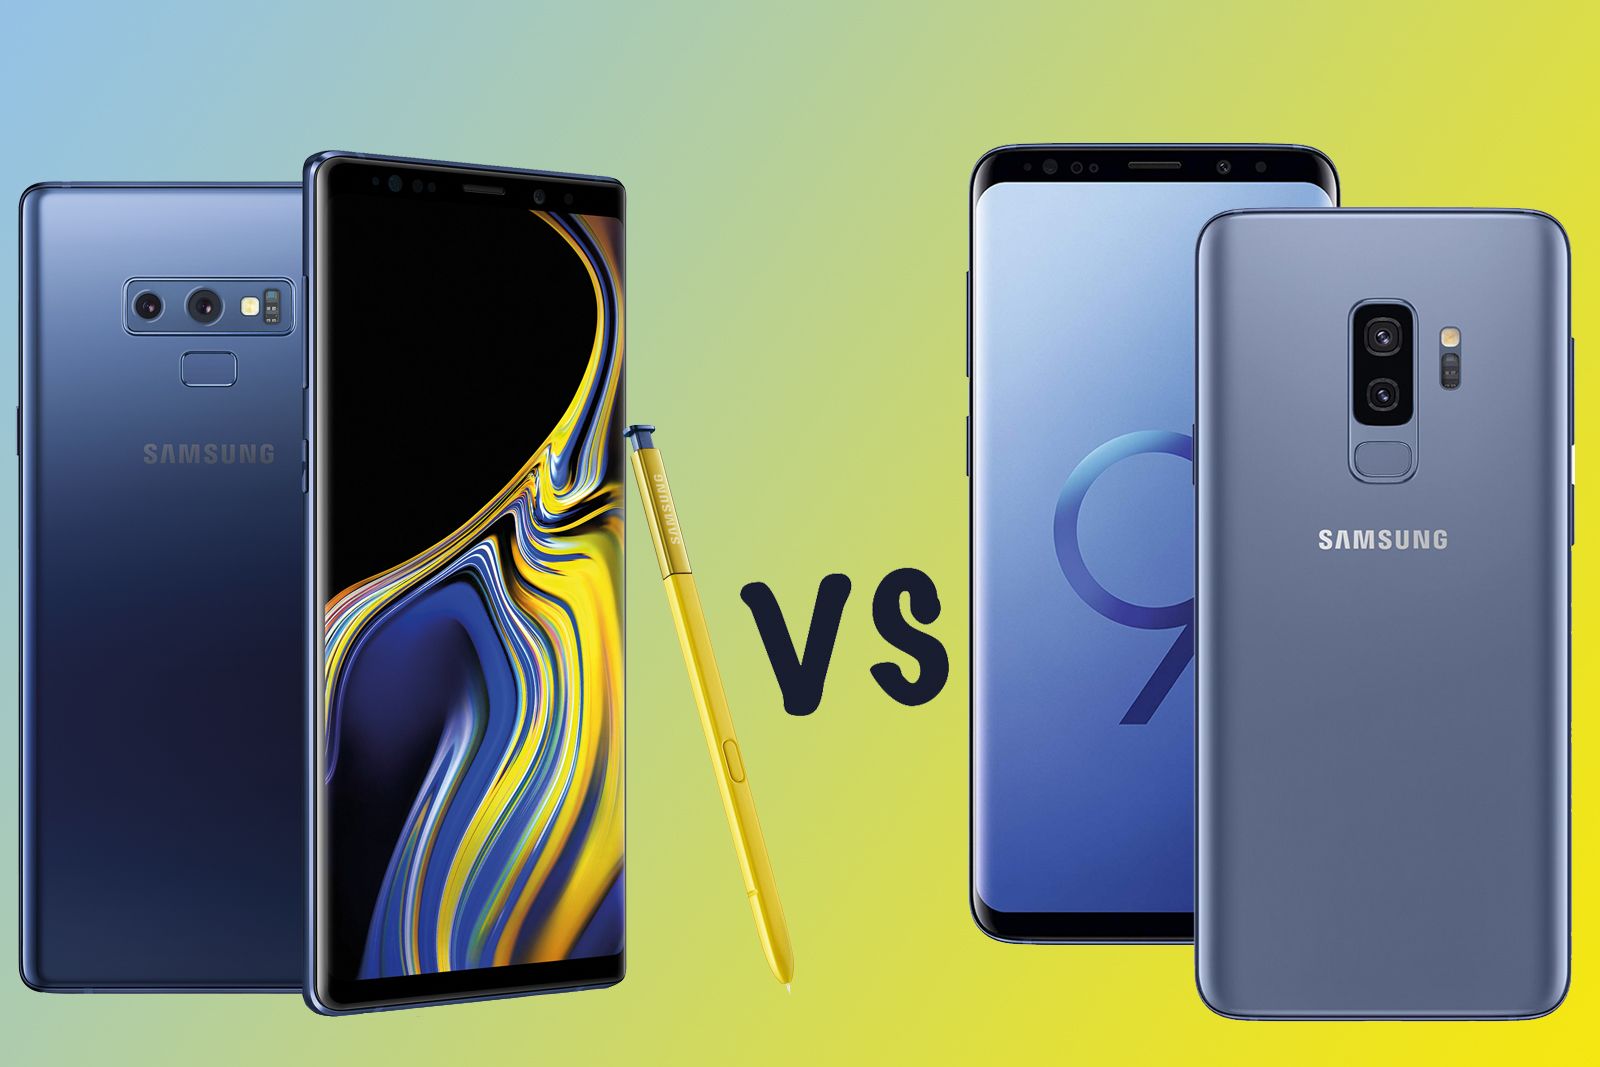 Samsung Galaxy Note 9 vs Galaxy S9 Whats the difference image 1